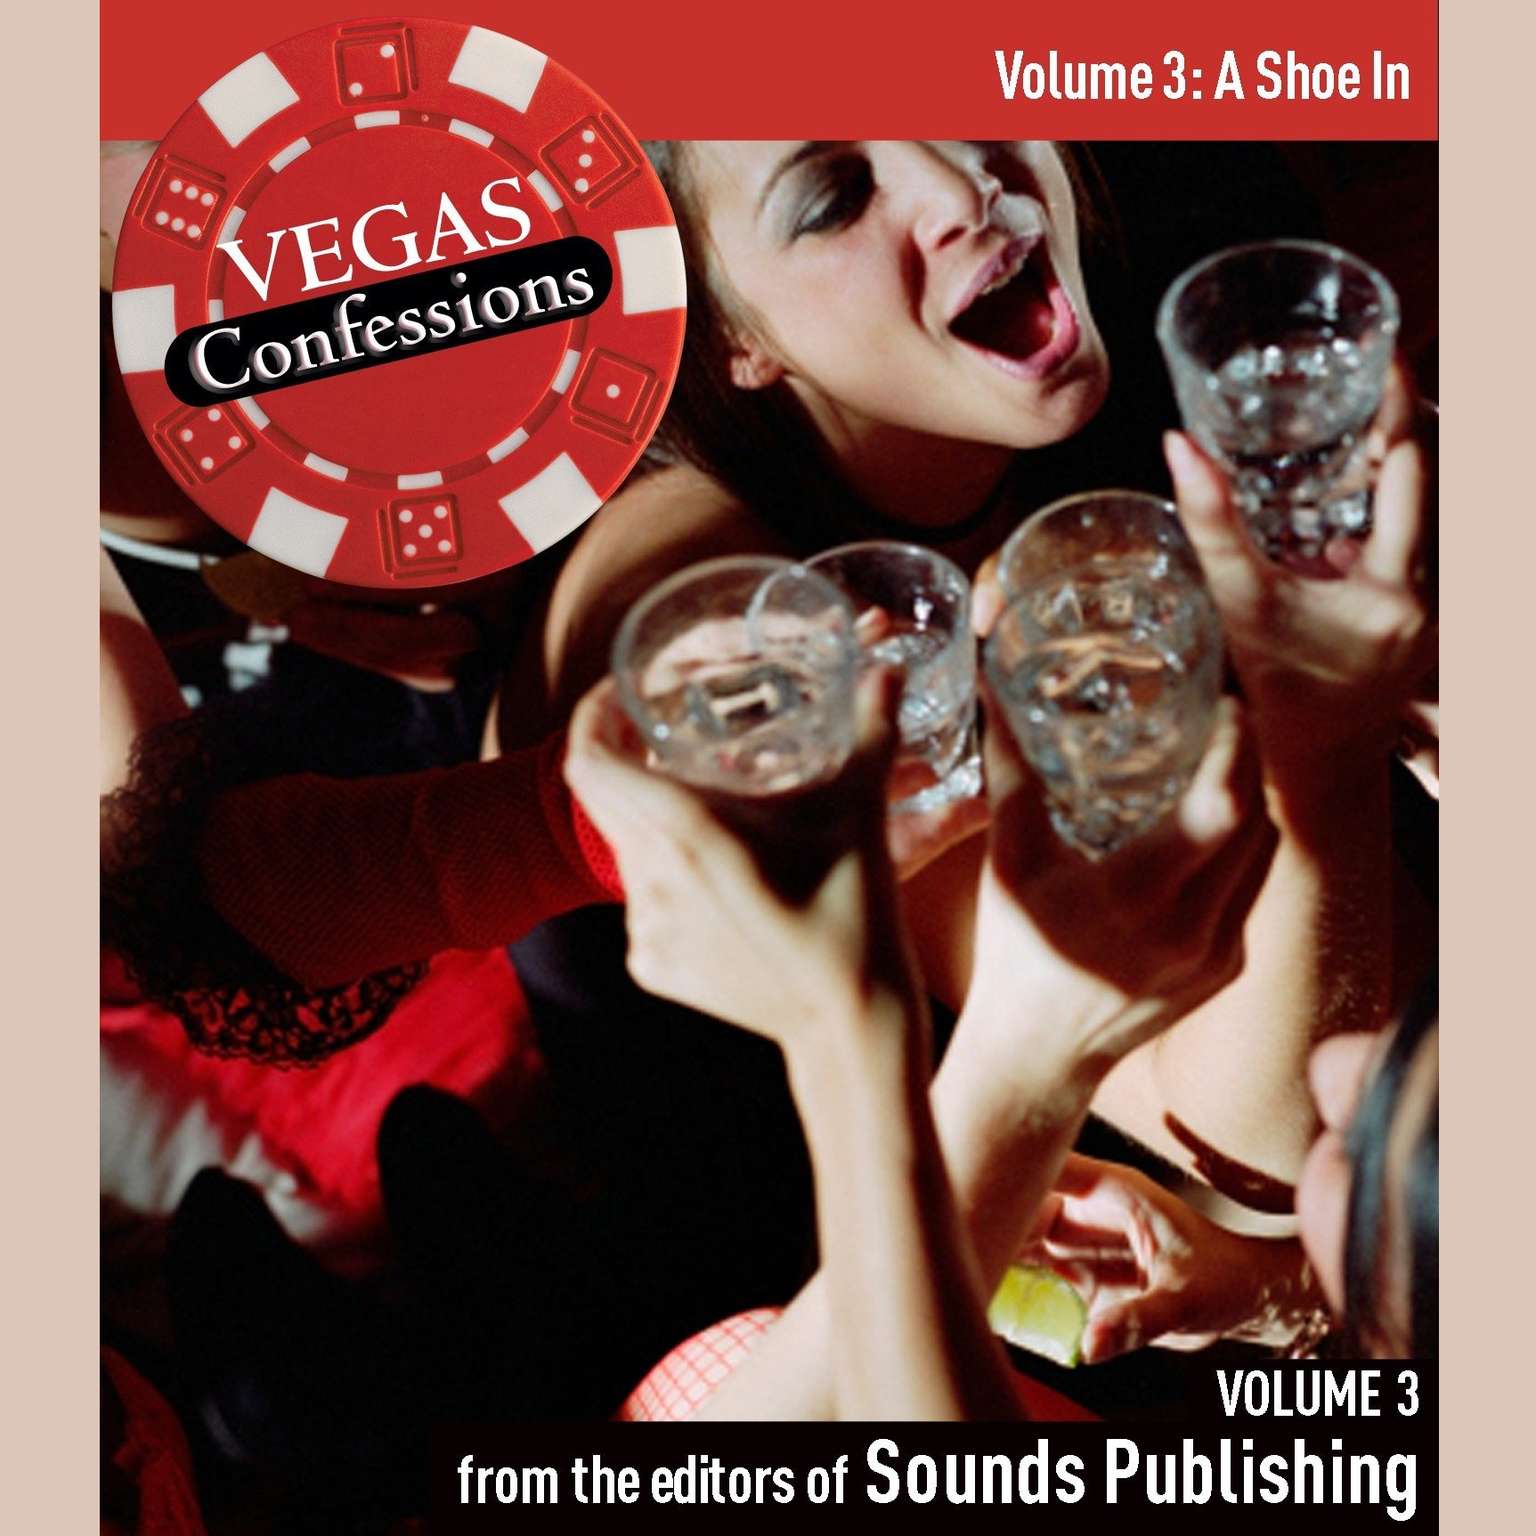 Vegas Confessions 3: A Shoe In Audiobook, by The Editors of Sounds Publishing